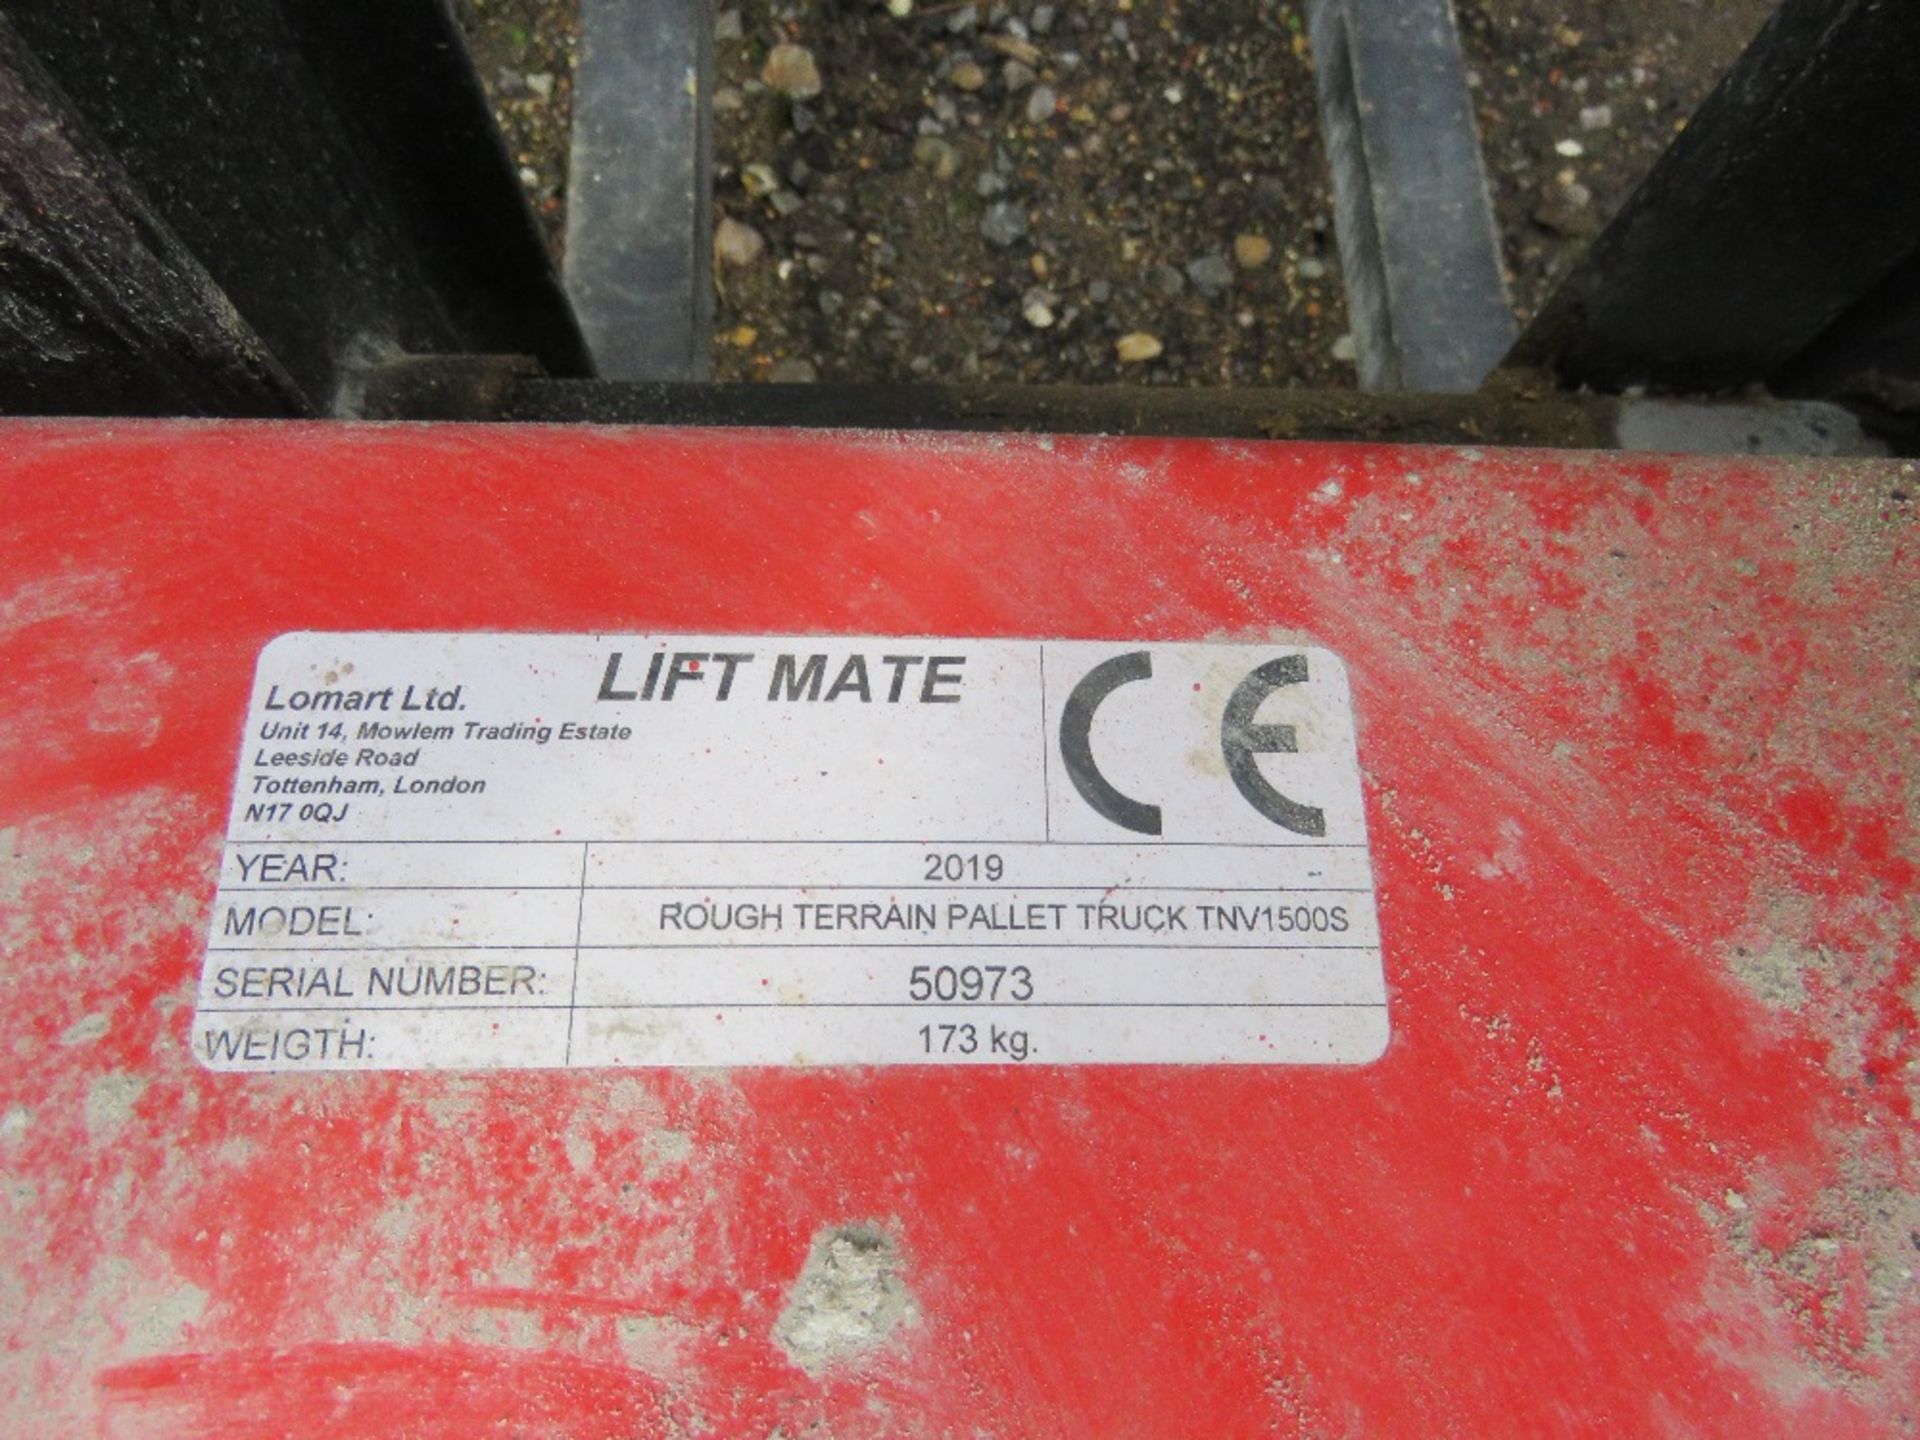 LIFTMATE ROUGH TERRAIN PALLET TRUCK, YEAR 2019. WHEN TESTED WAS SEEN TO LIFT AND LOWER, SOURCED FROM - Image 4 of 4